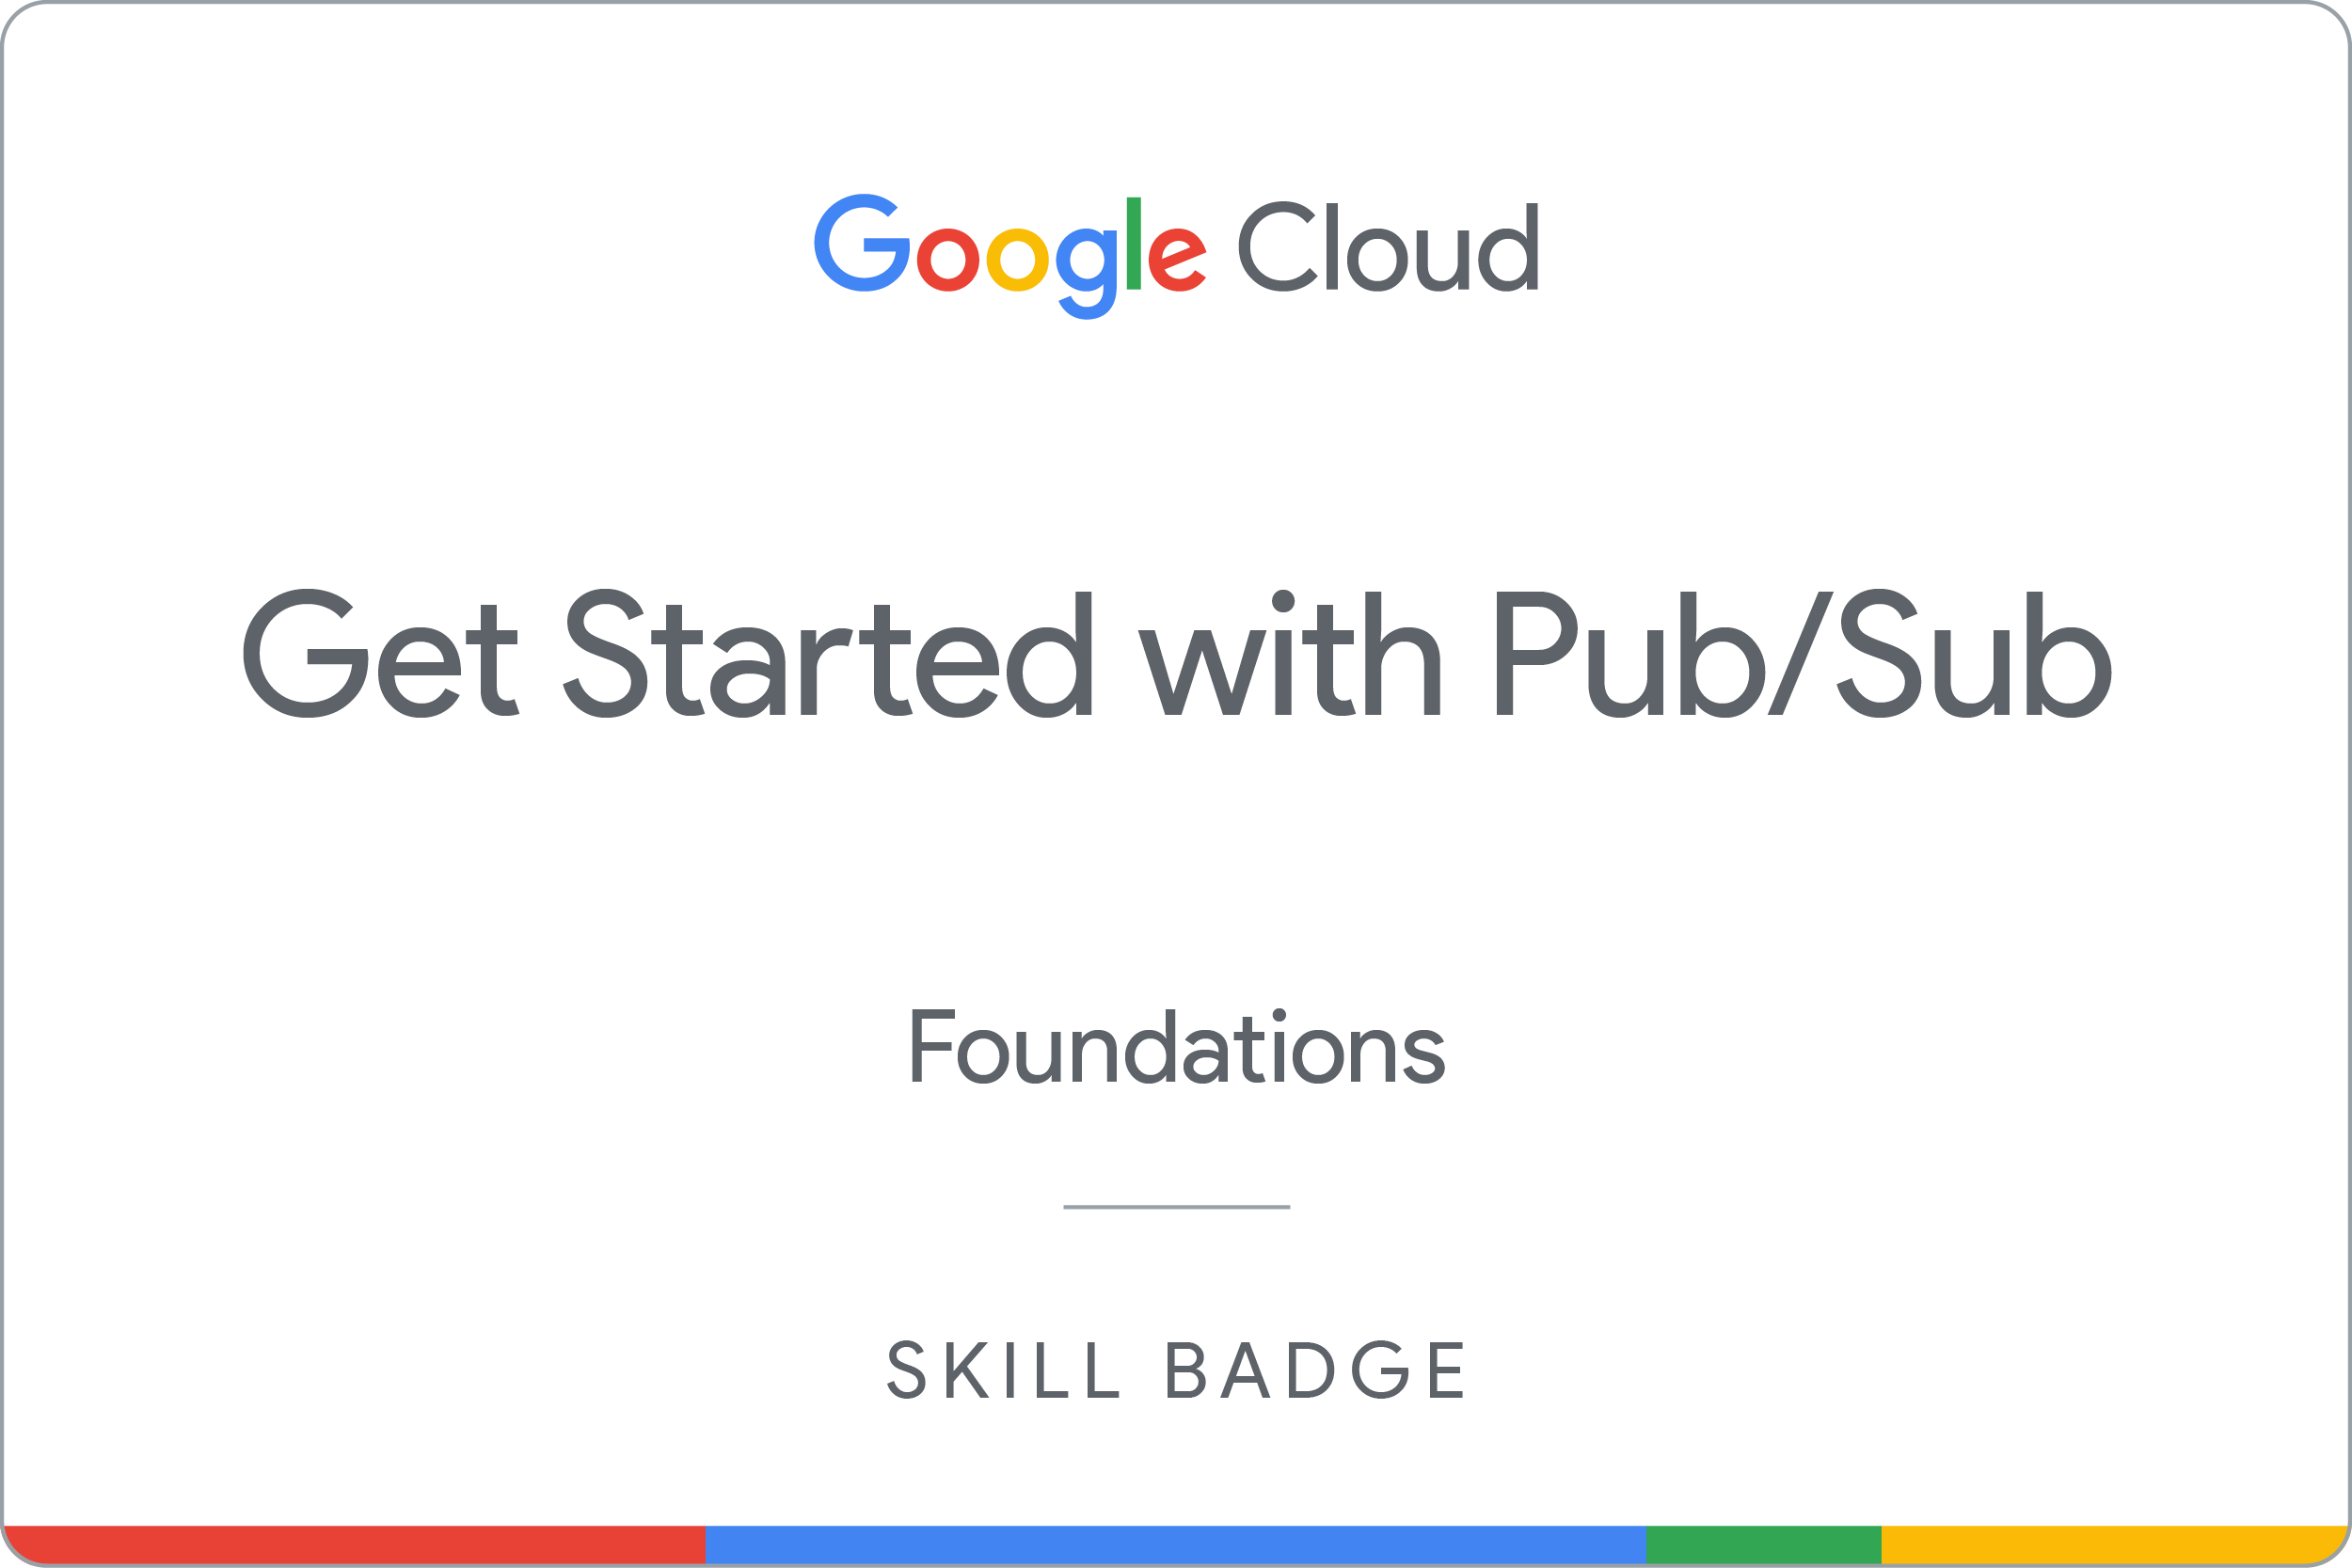 Get Started with Pub/Sub badge